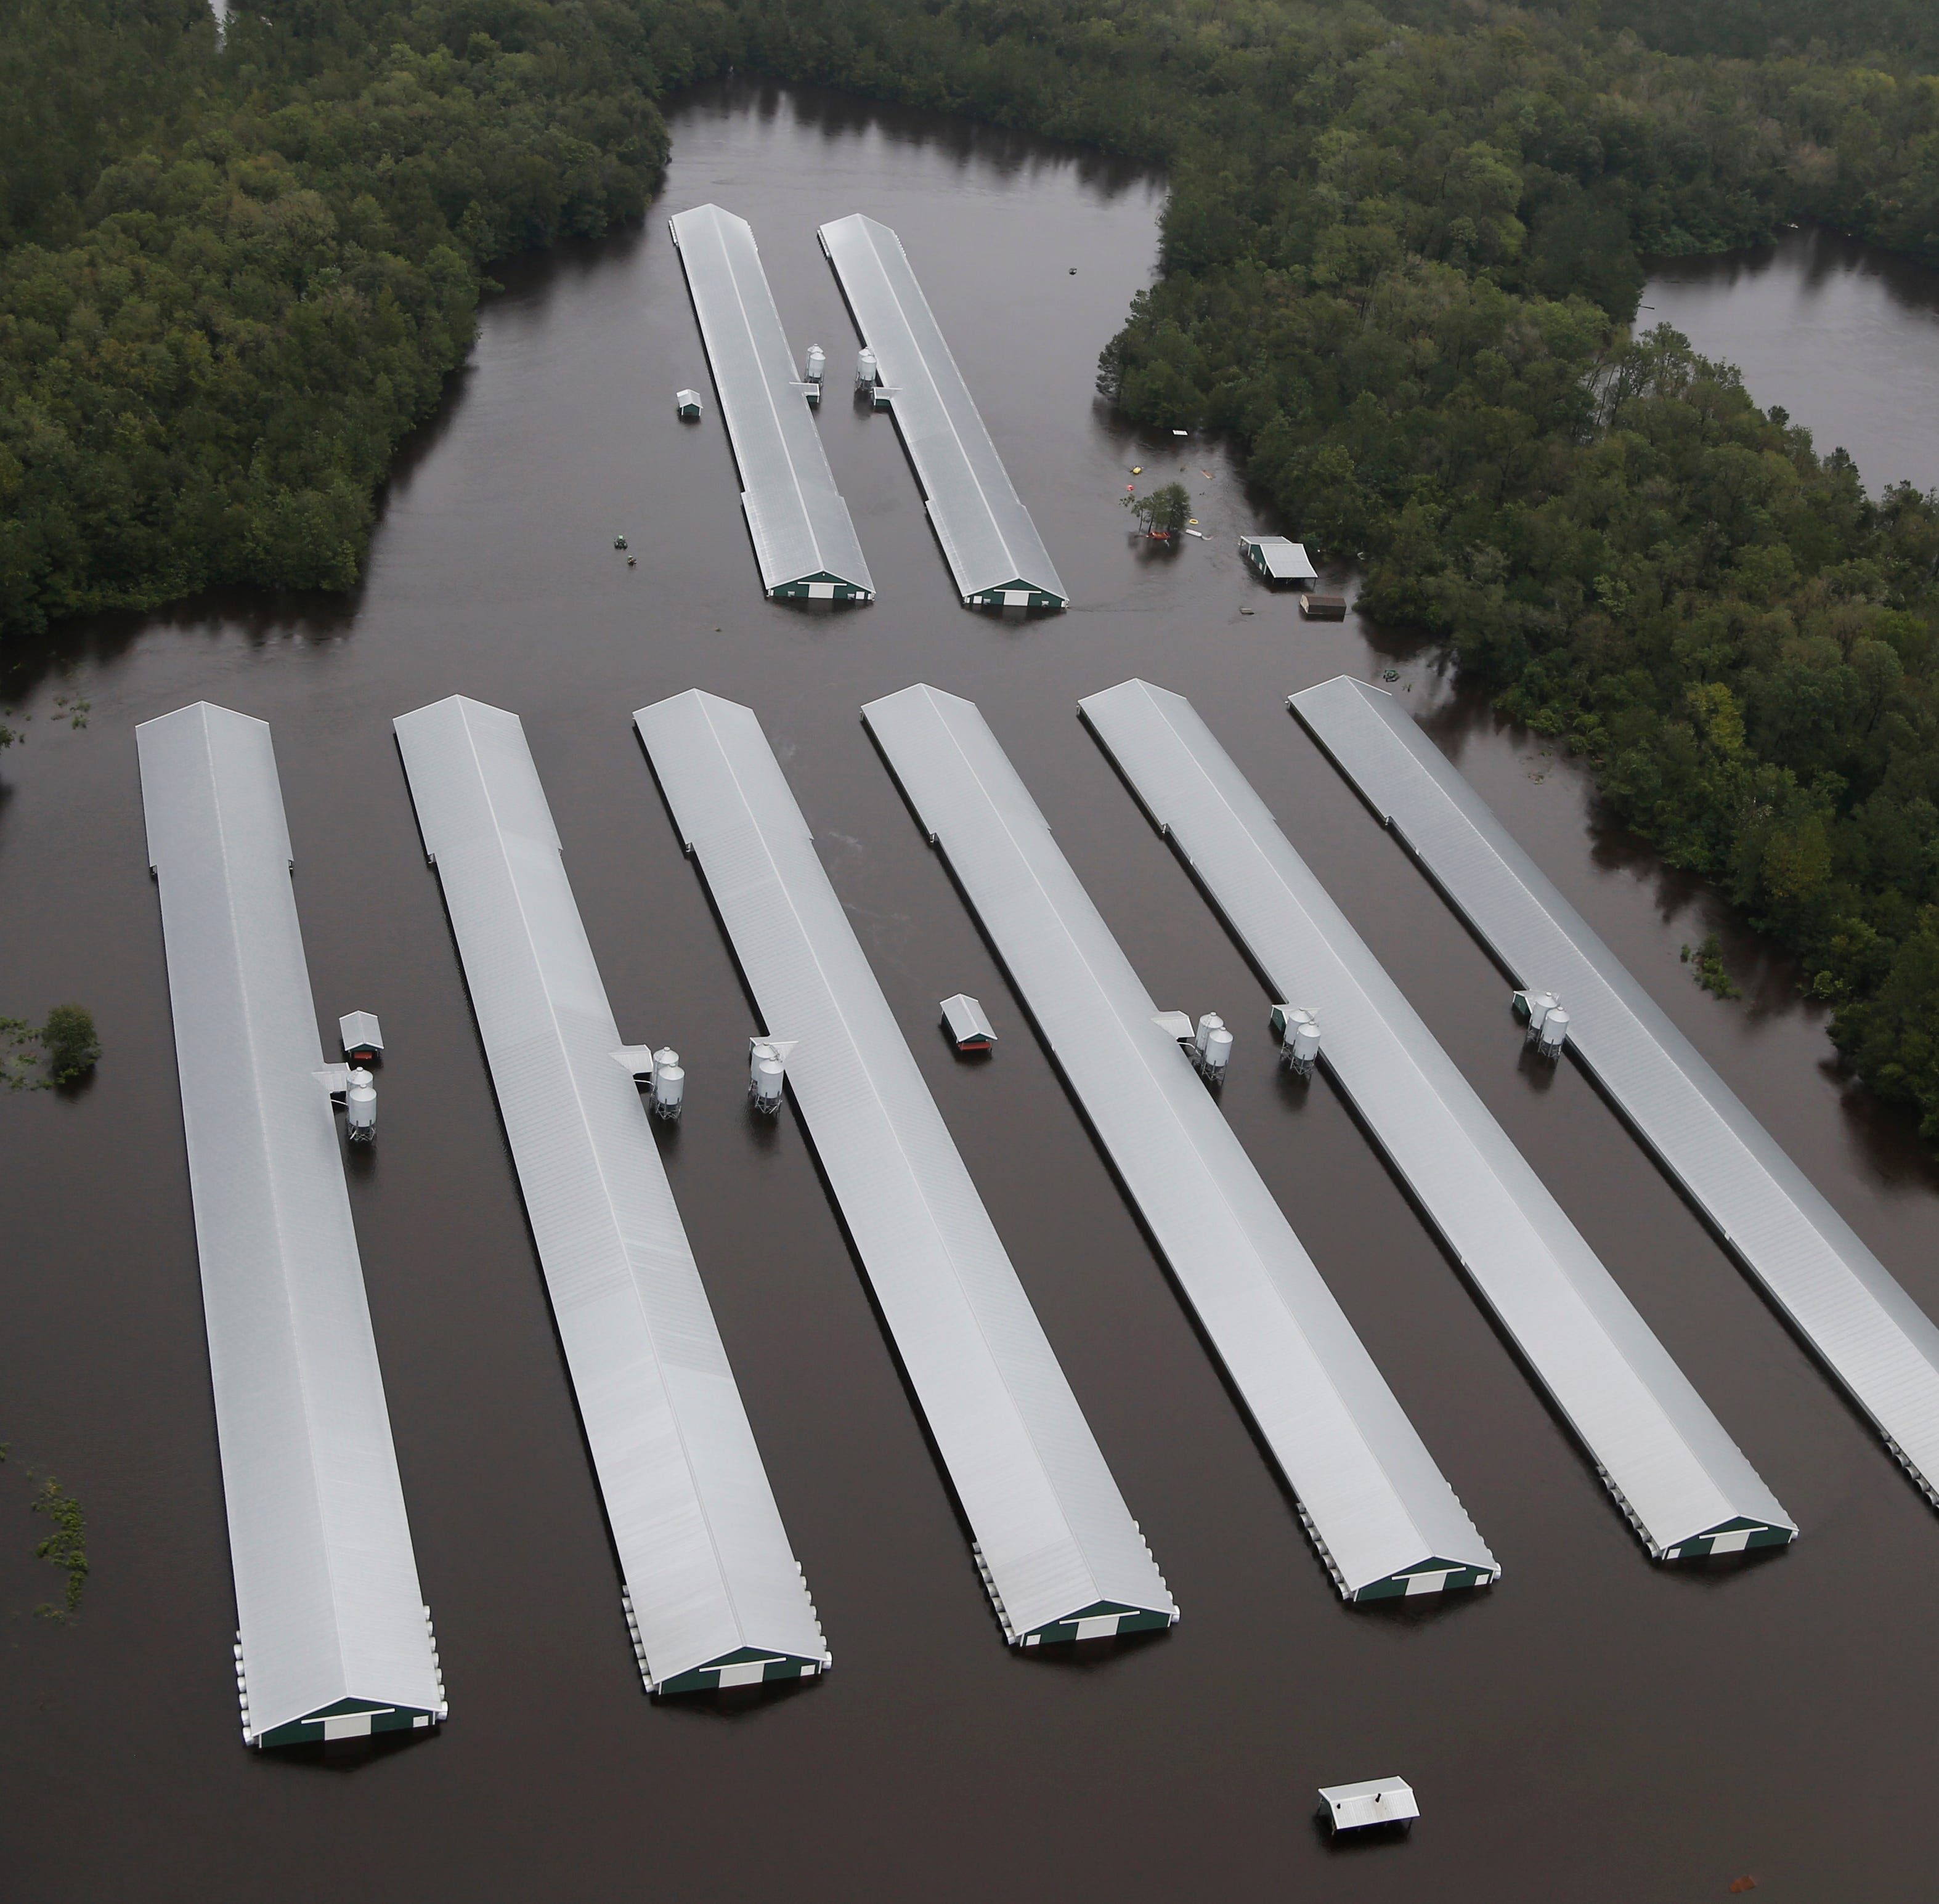 Chicken farm buildings are inundated with floodwater from Hurricane Florence near Trenton, N.C.